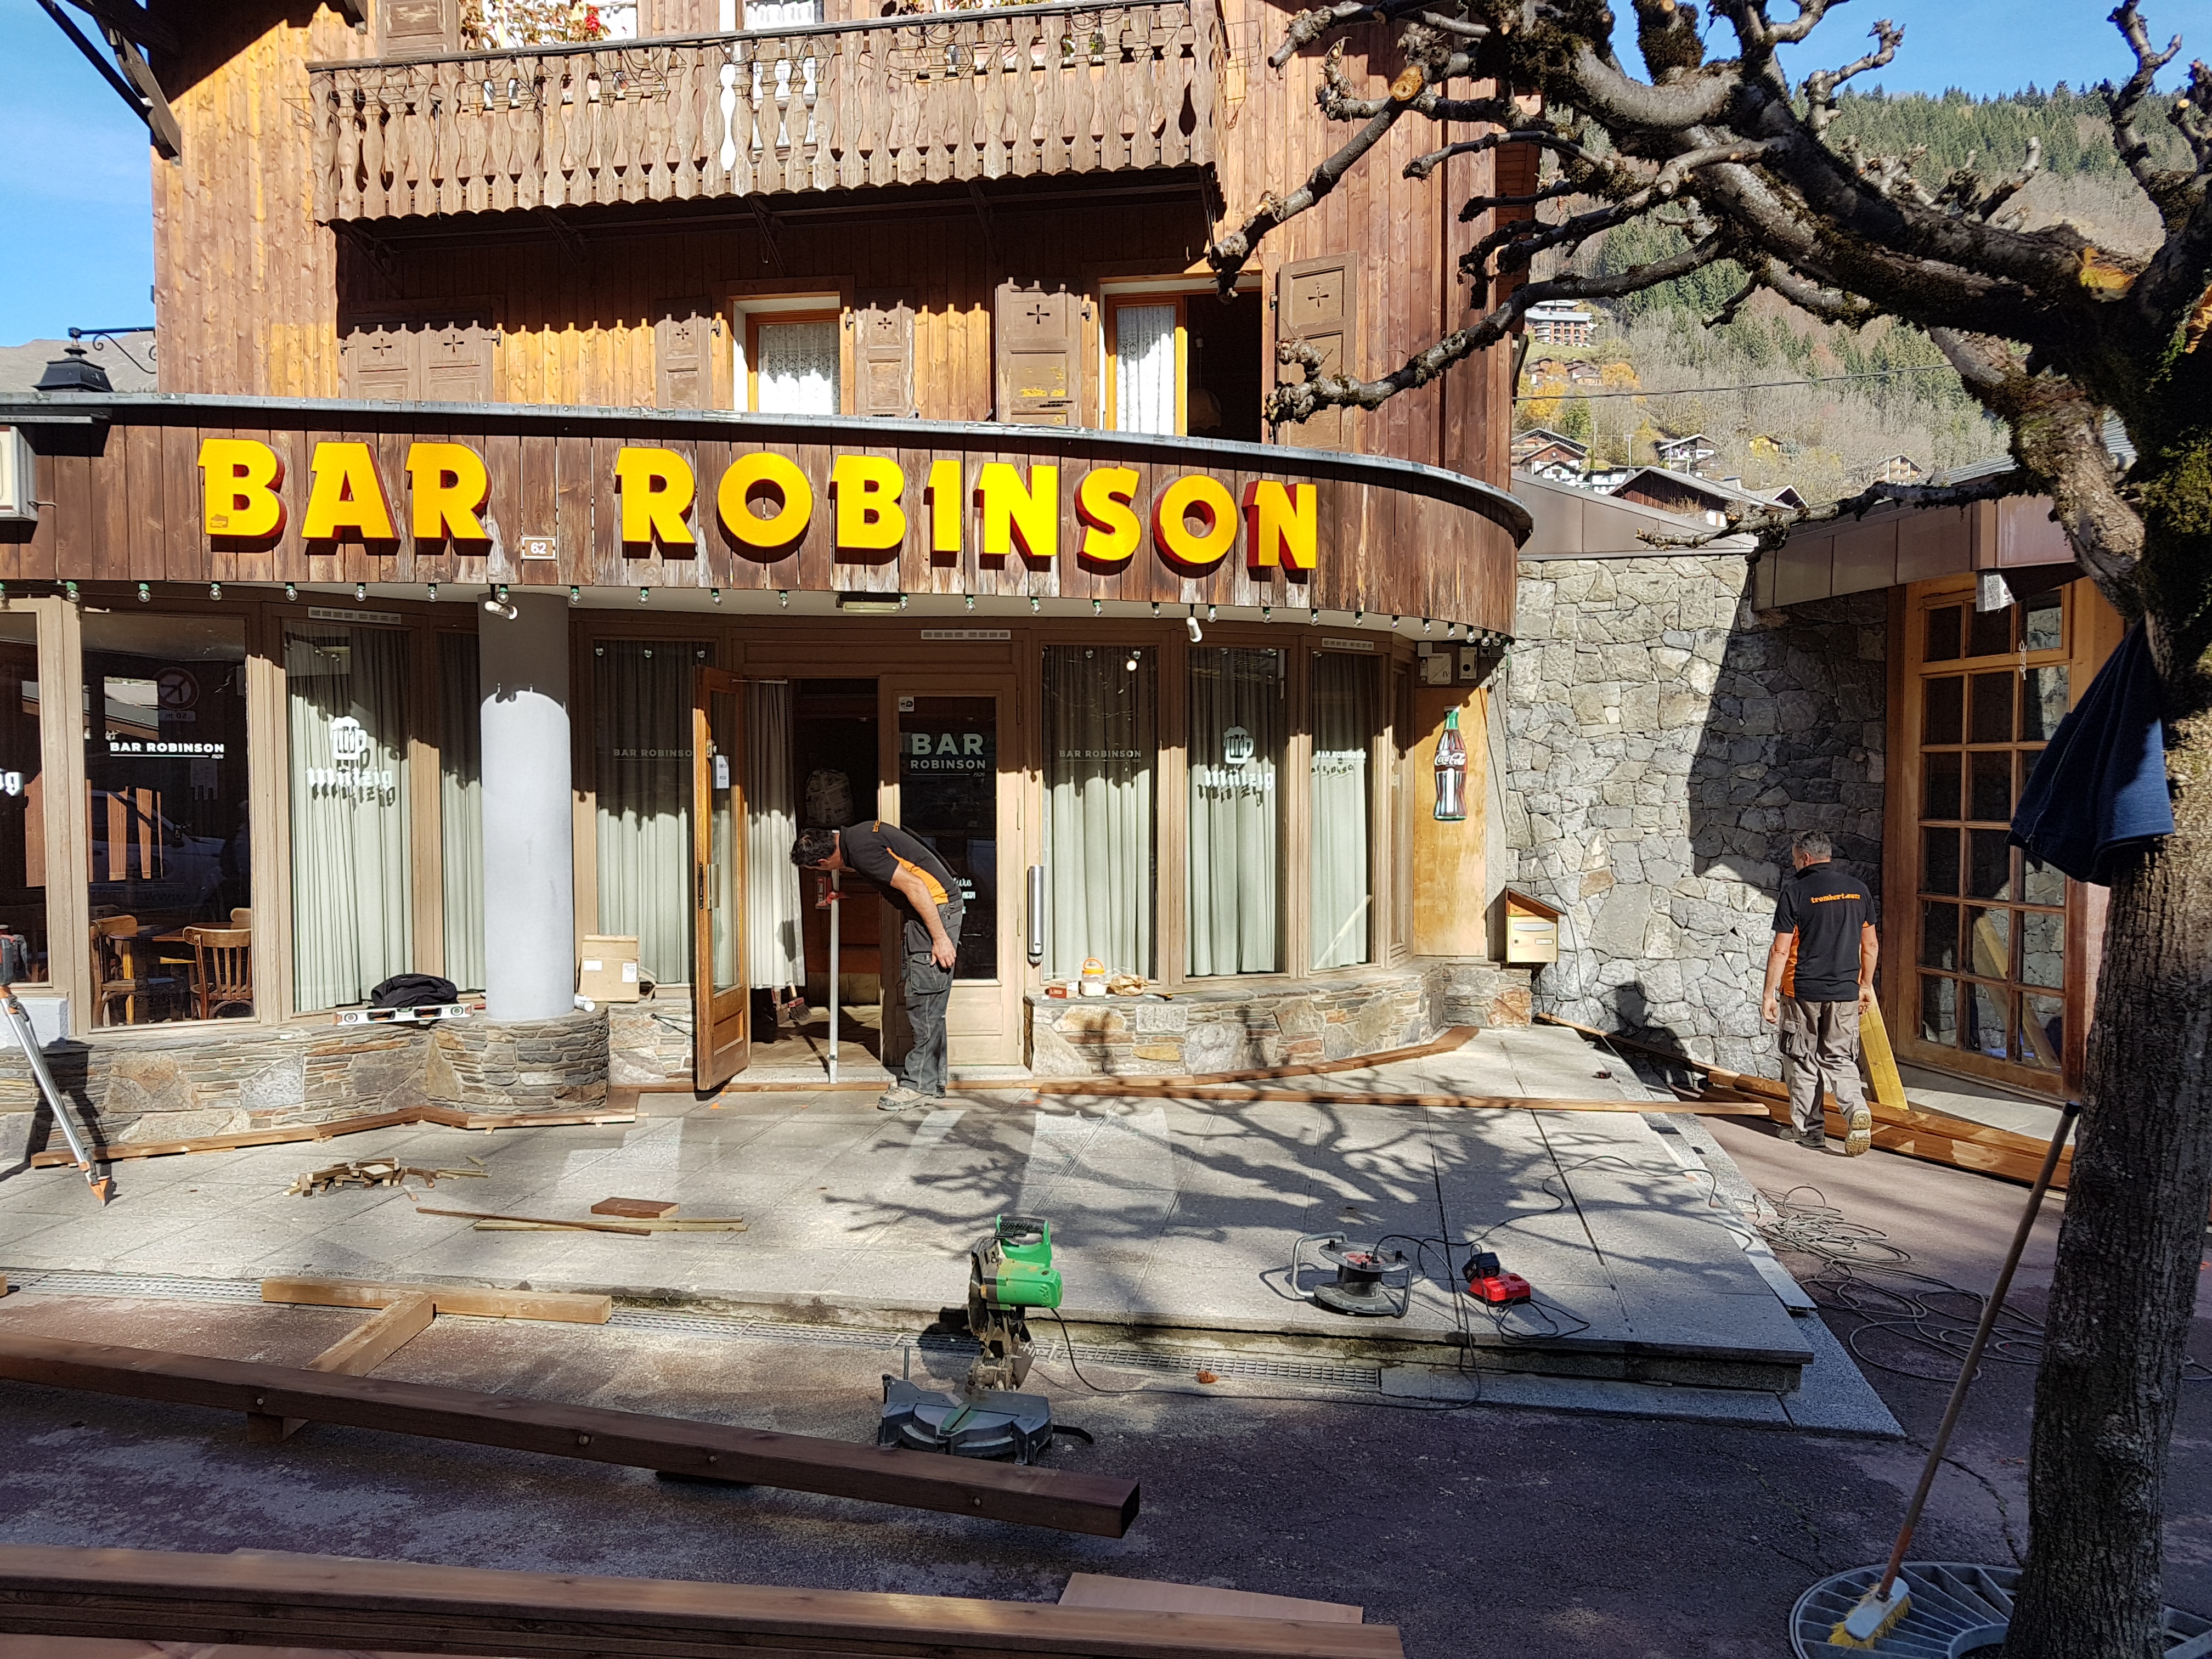 Bar Robinson is getting something new this winter